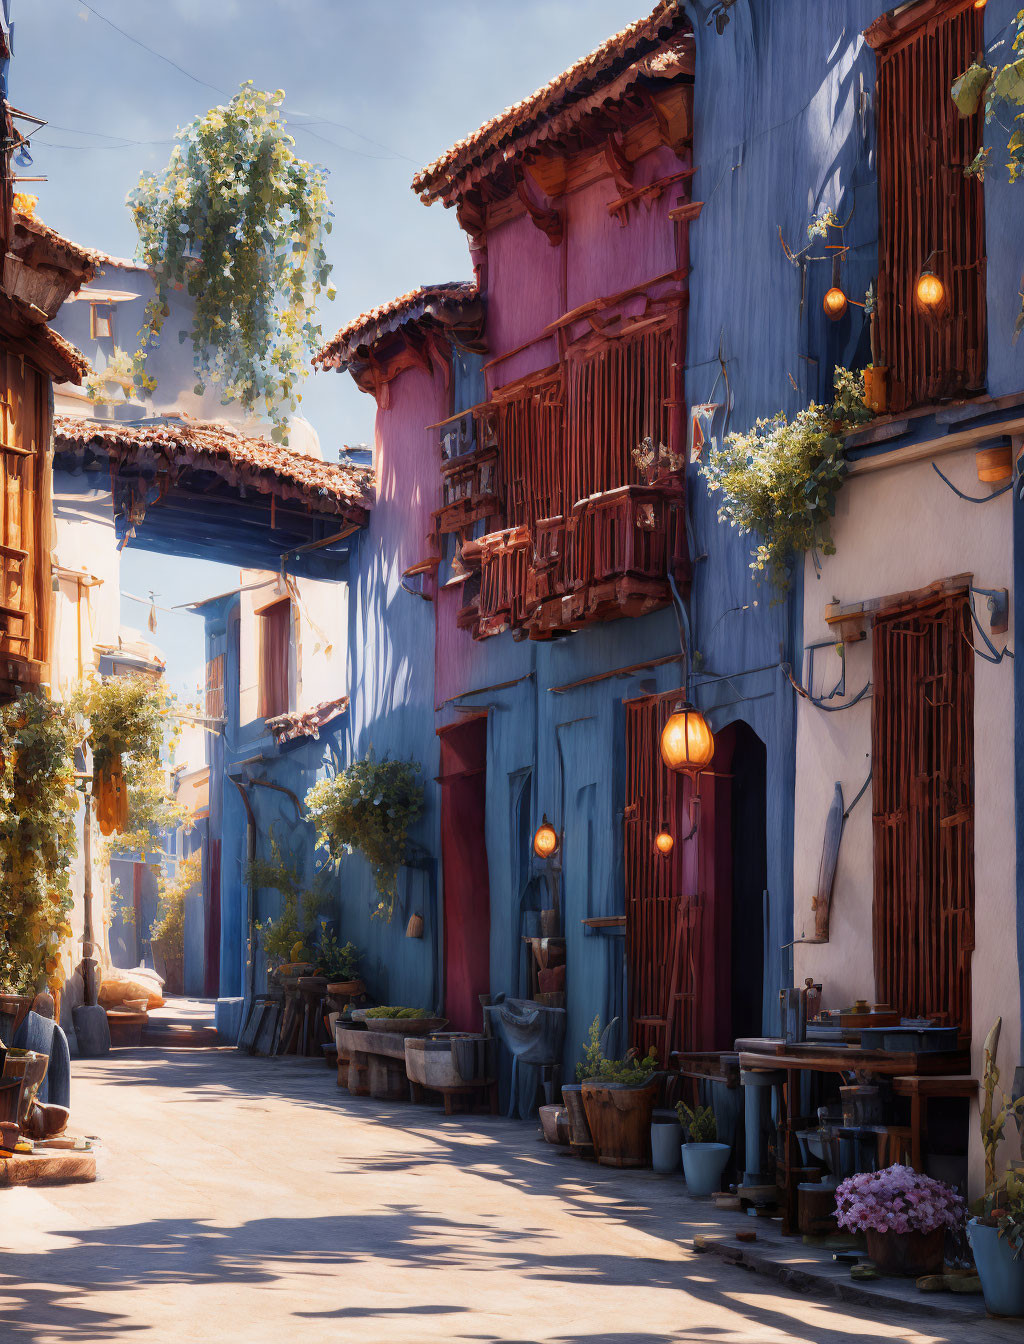 Vibrant blue and pink buildings on picturesque street with hanging lanterns and lush greenery